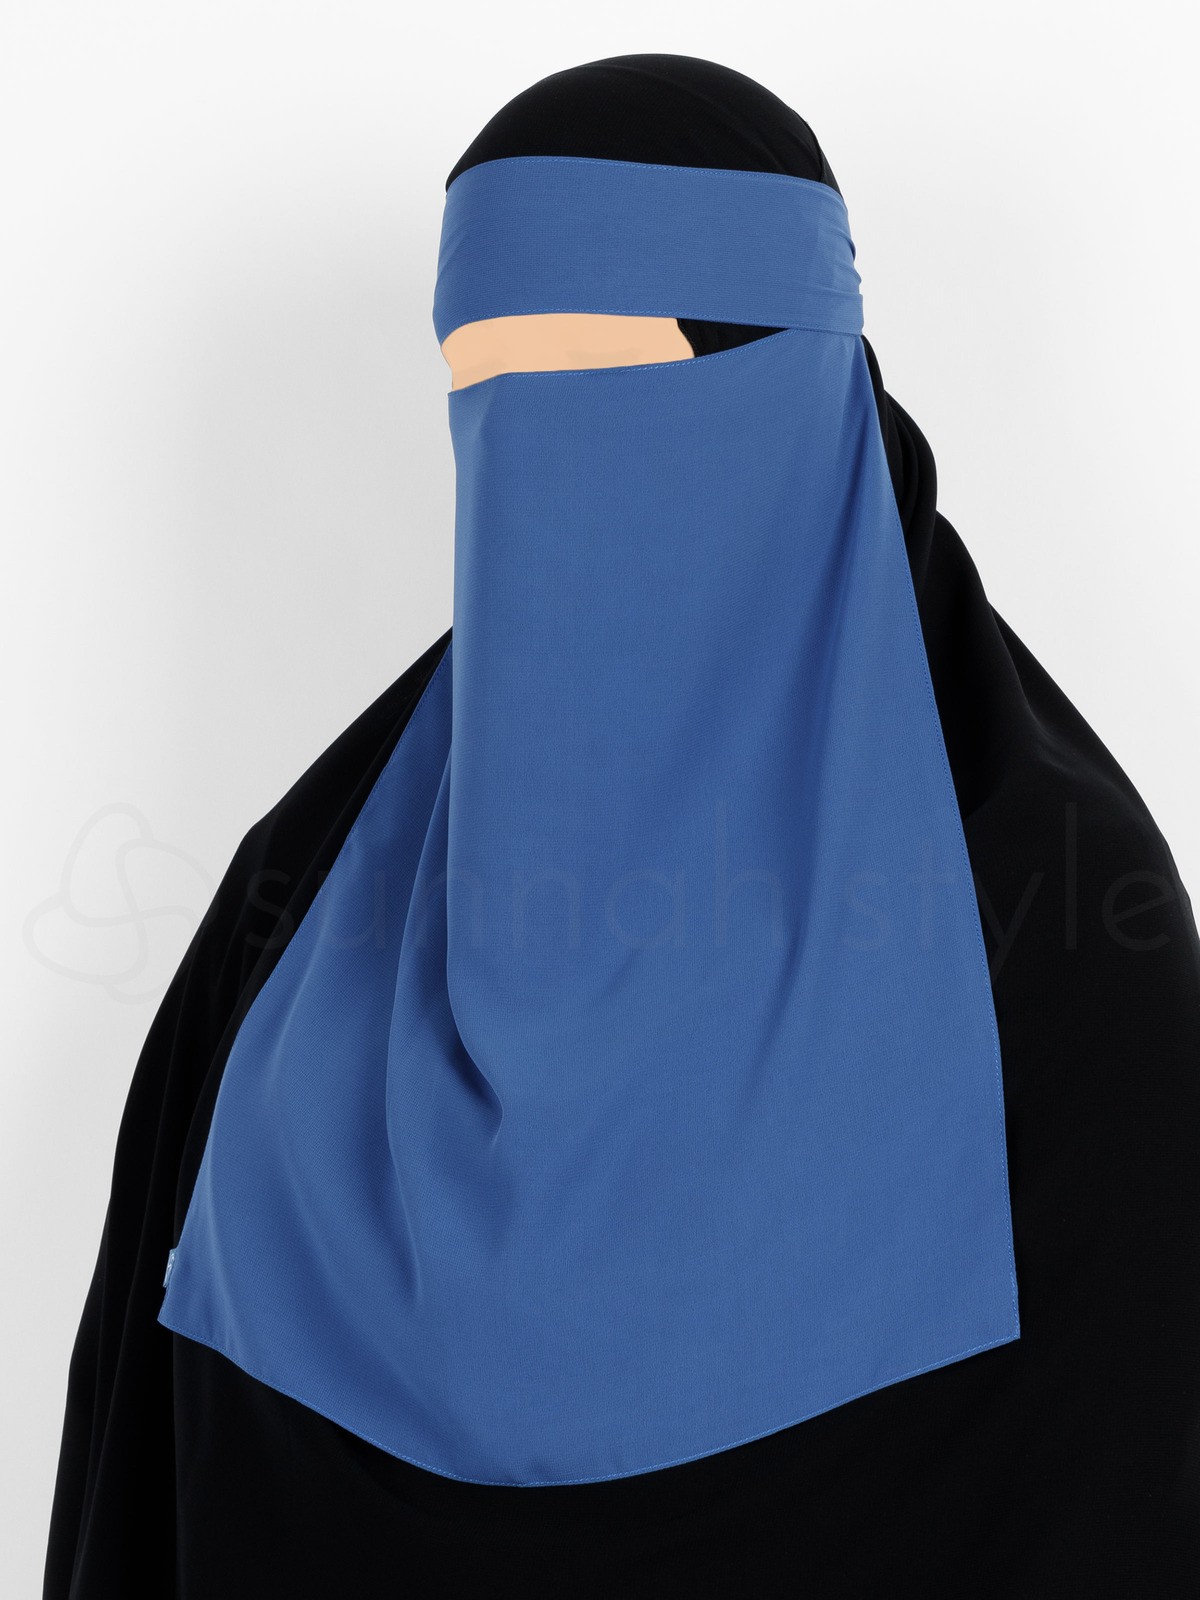 Sunnah Style - Pull-Down One Layer Niqab (Blue Jay)